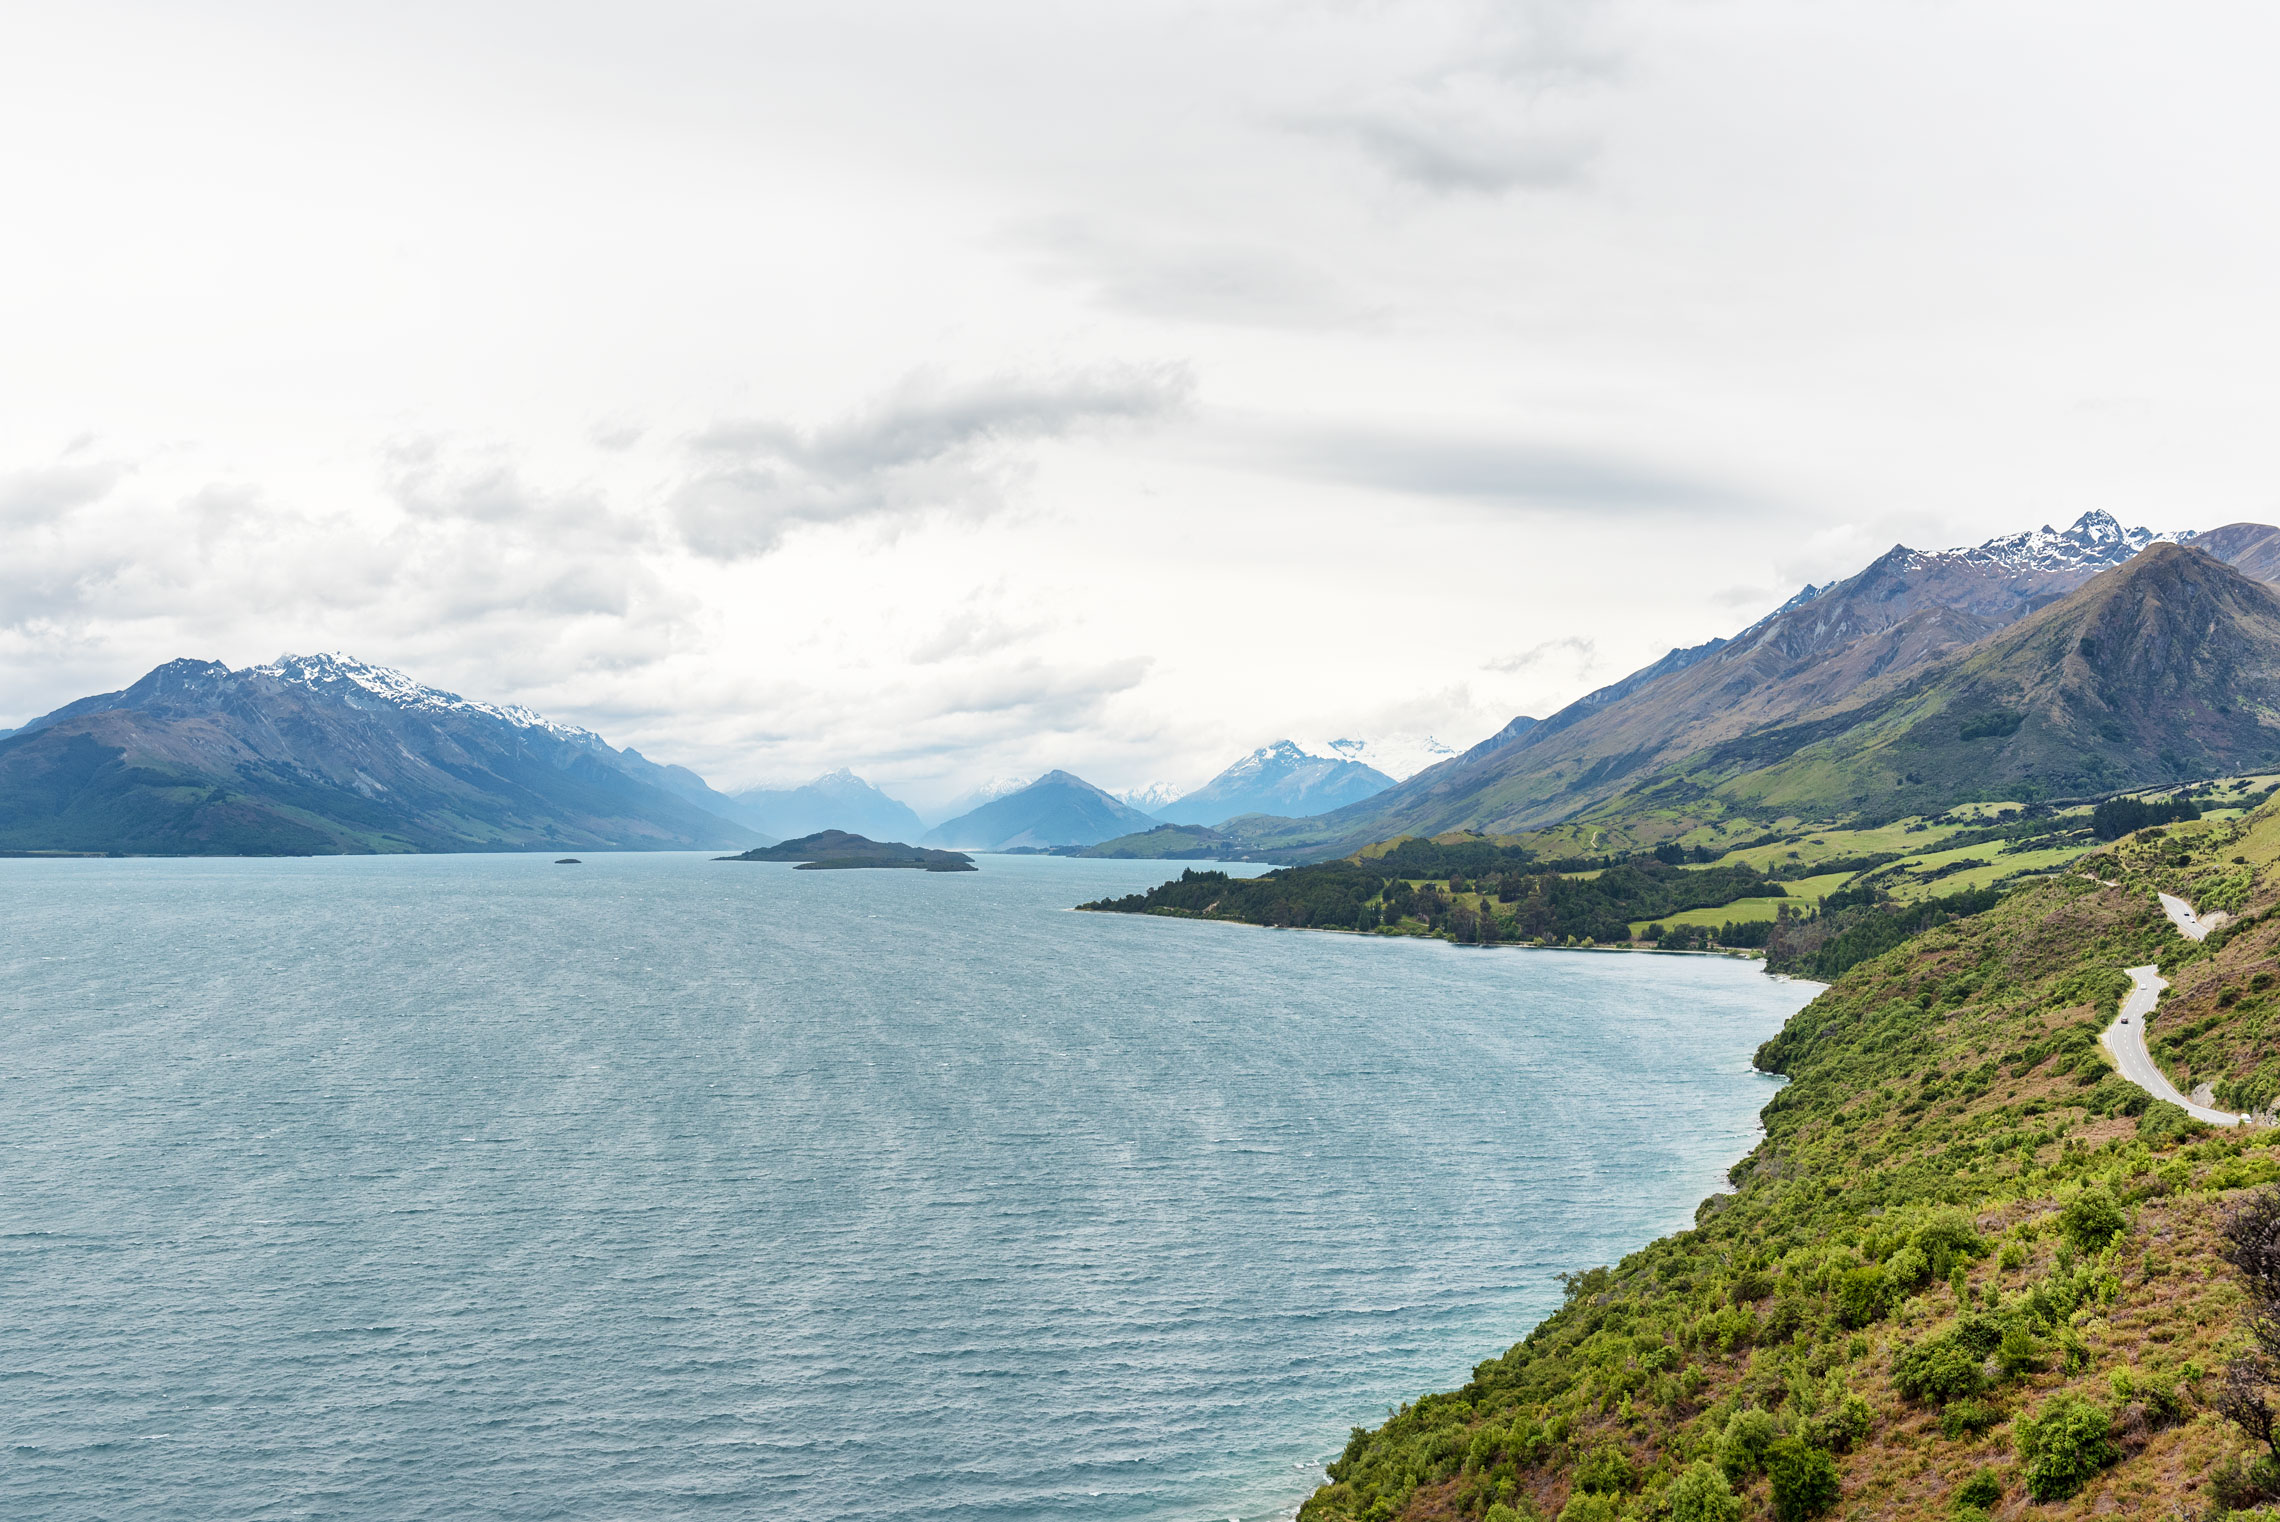 Most Scenic Roads in New Zealand, Great Coast Road, Queenstown-Glenorchy Road, Lake Wakatipu